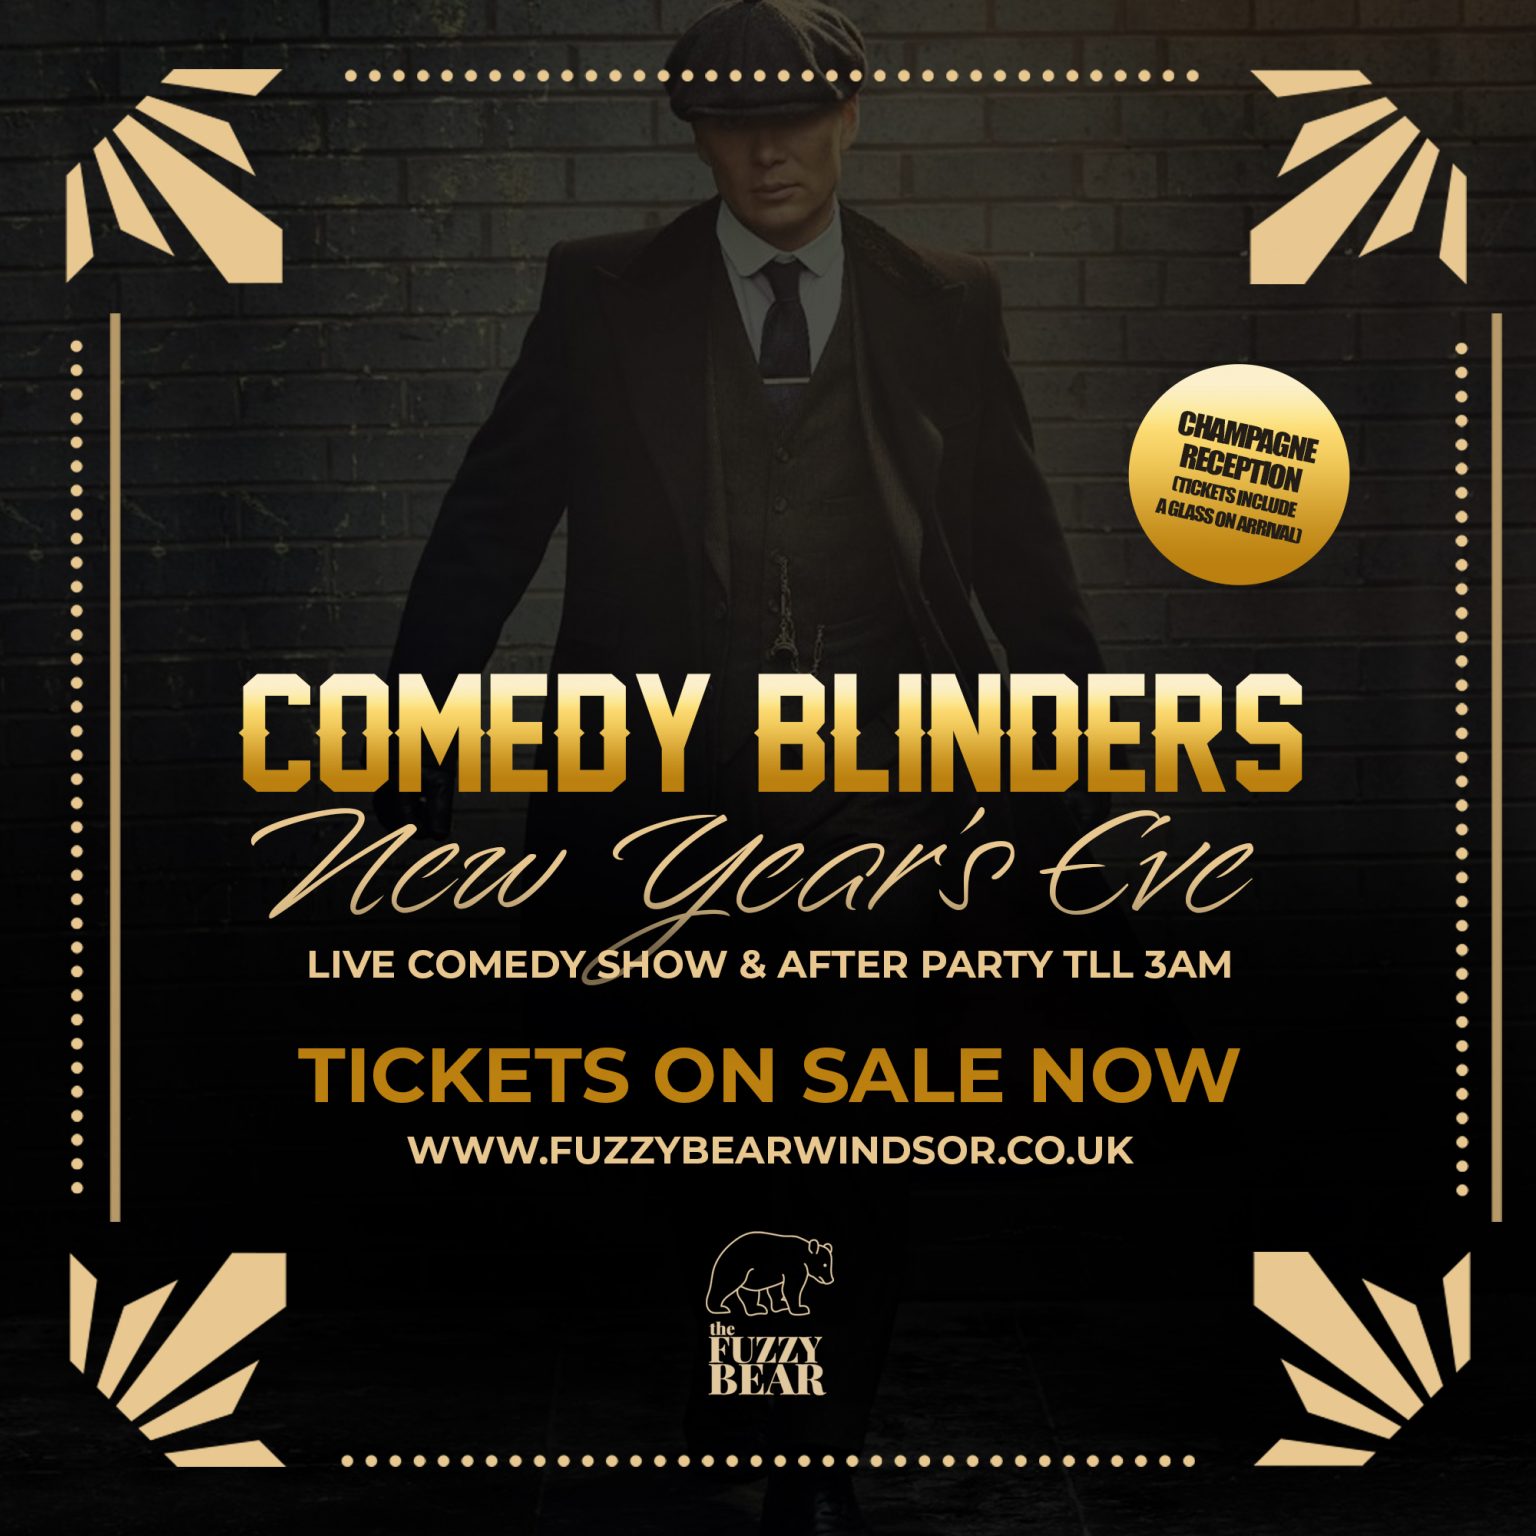 Comedy Blinders New Year's Eve Comedy Show Fuzzy Bear Comedy Club